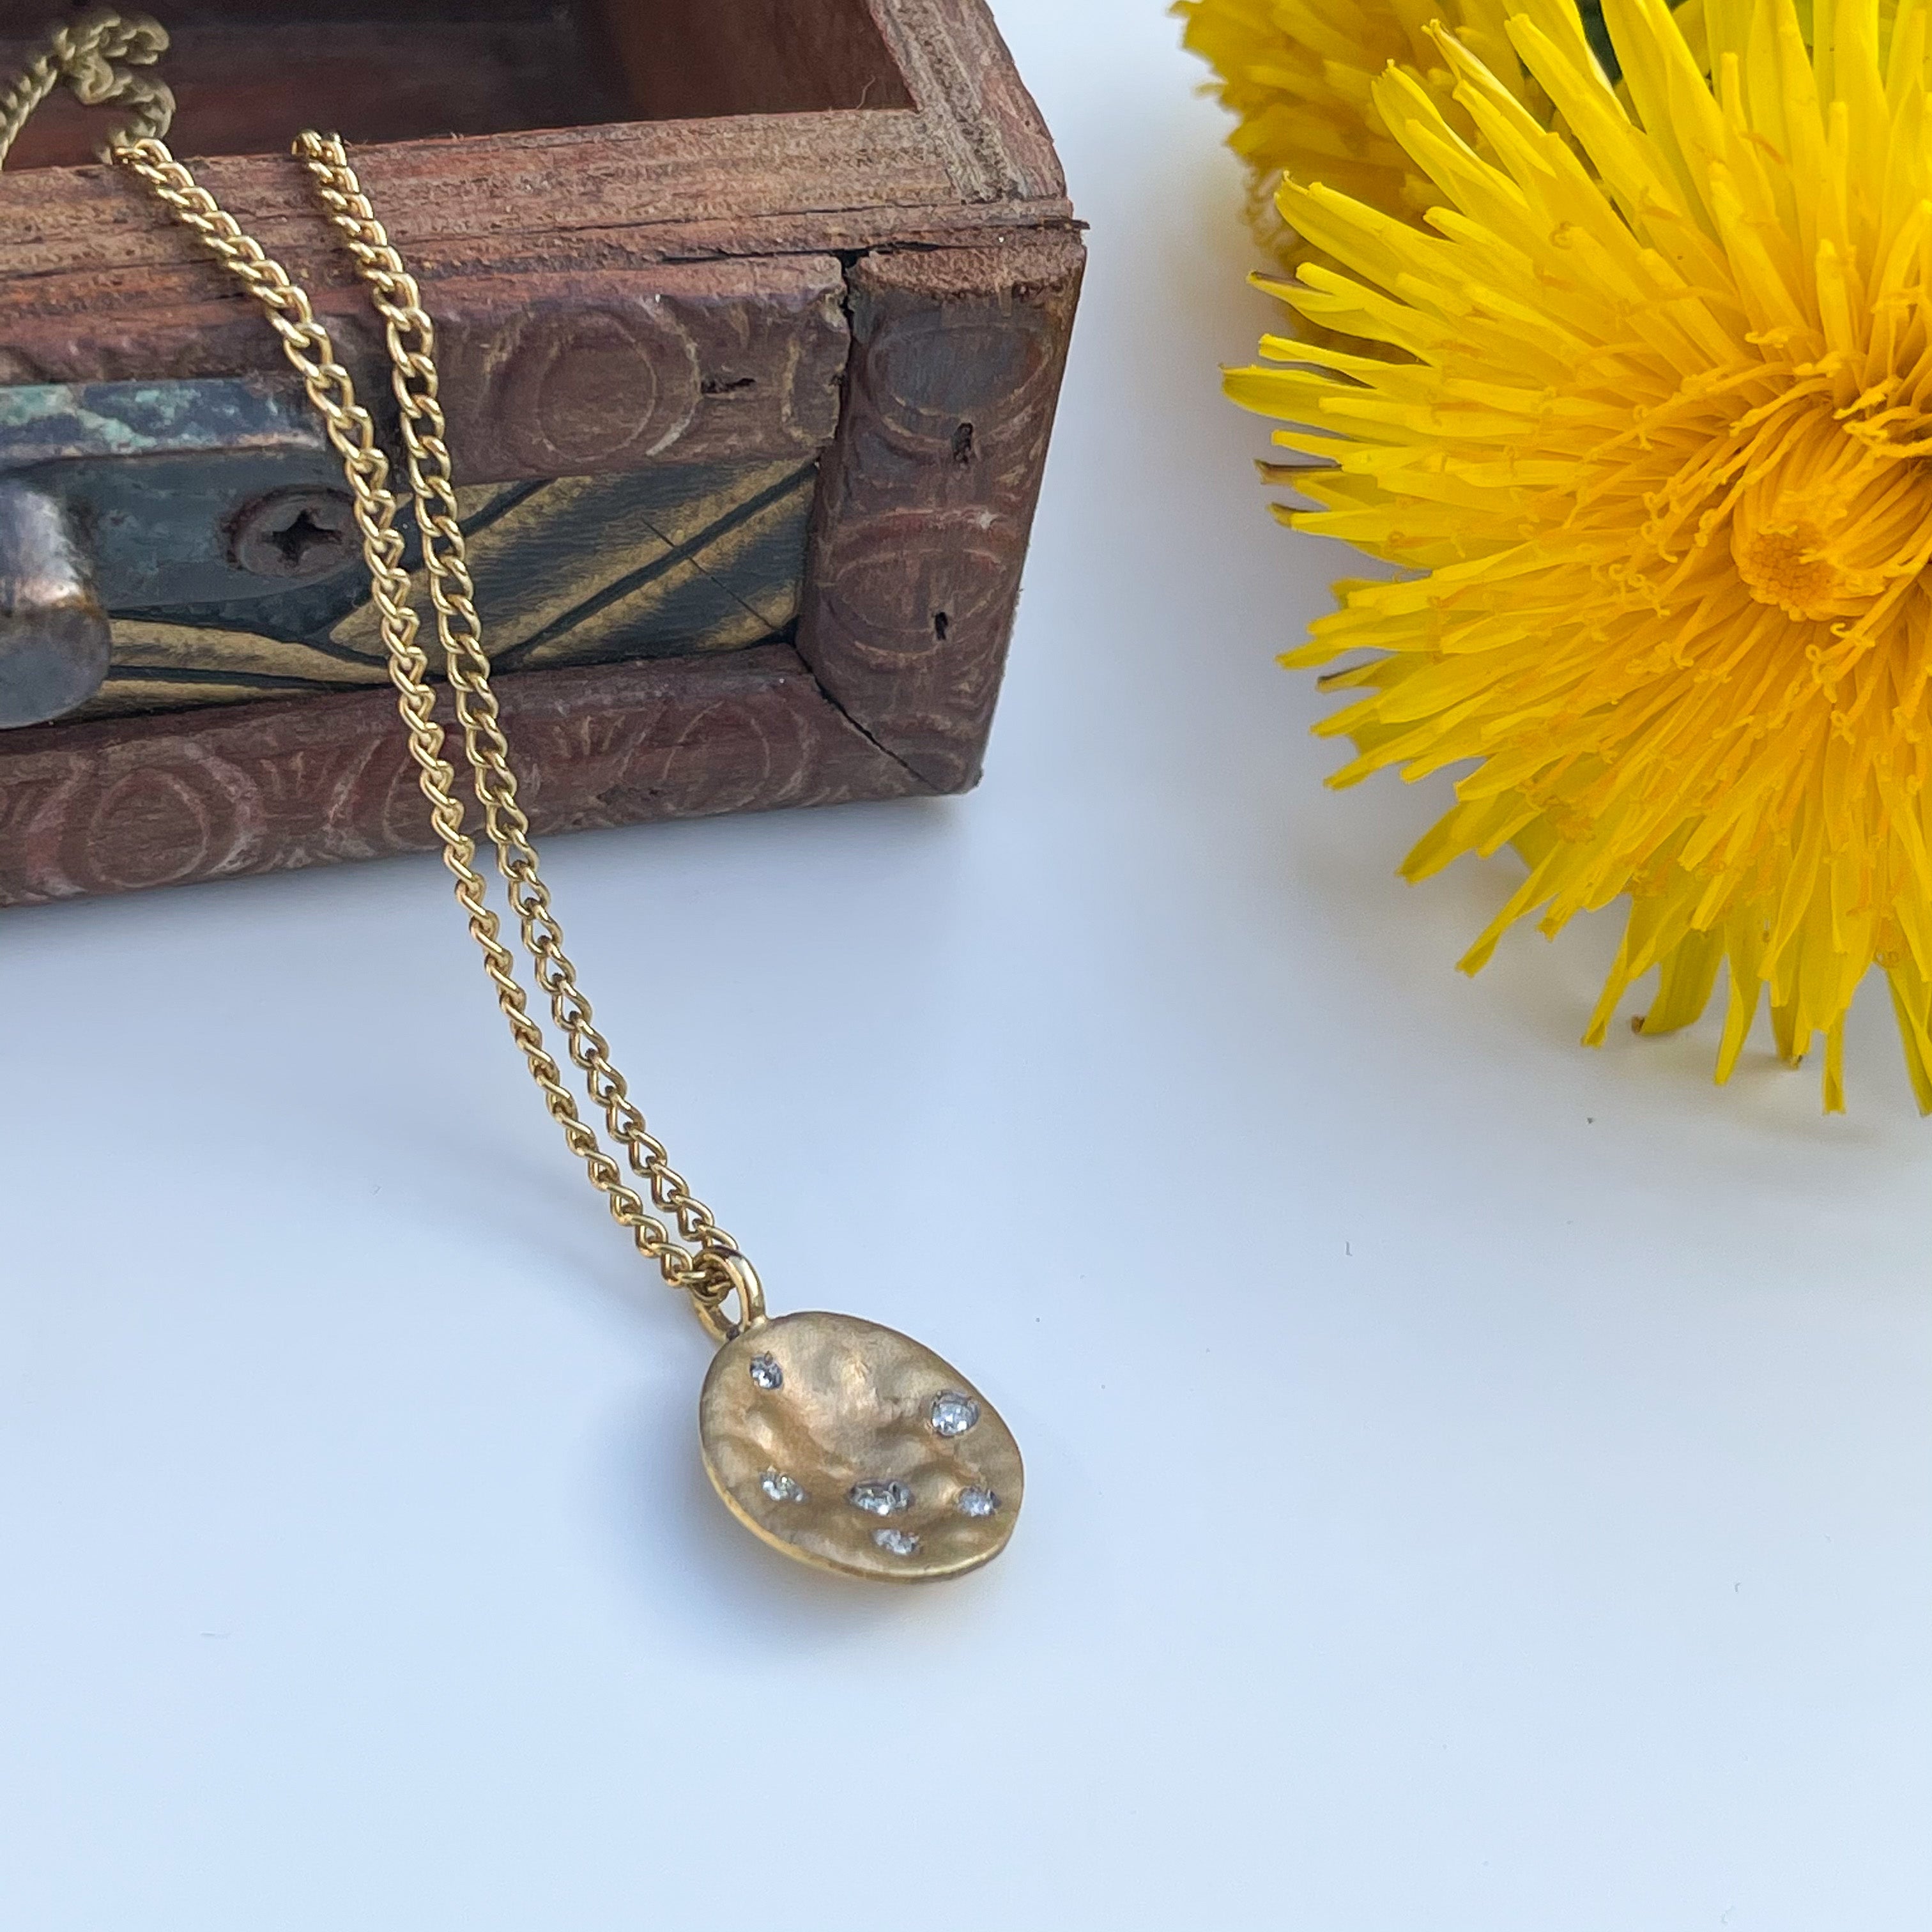 Necklace in 9k Yellow Gold with Small Disc Pendant and Diamonds